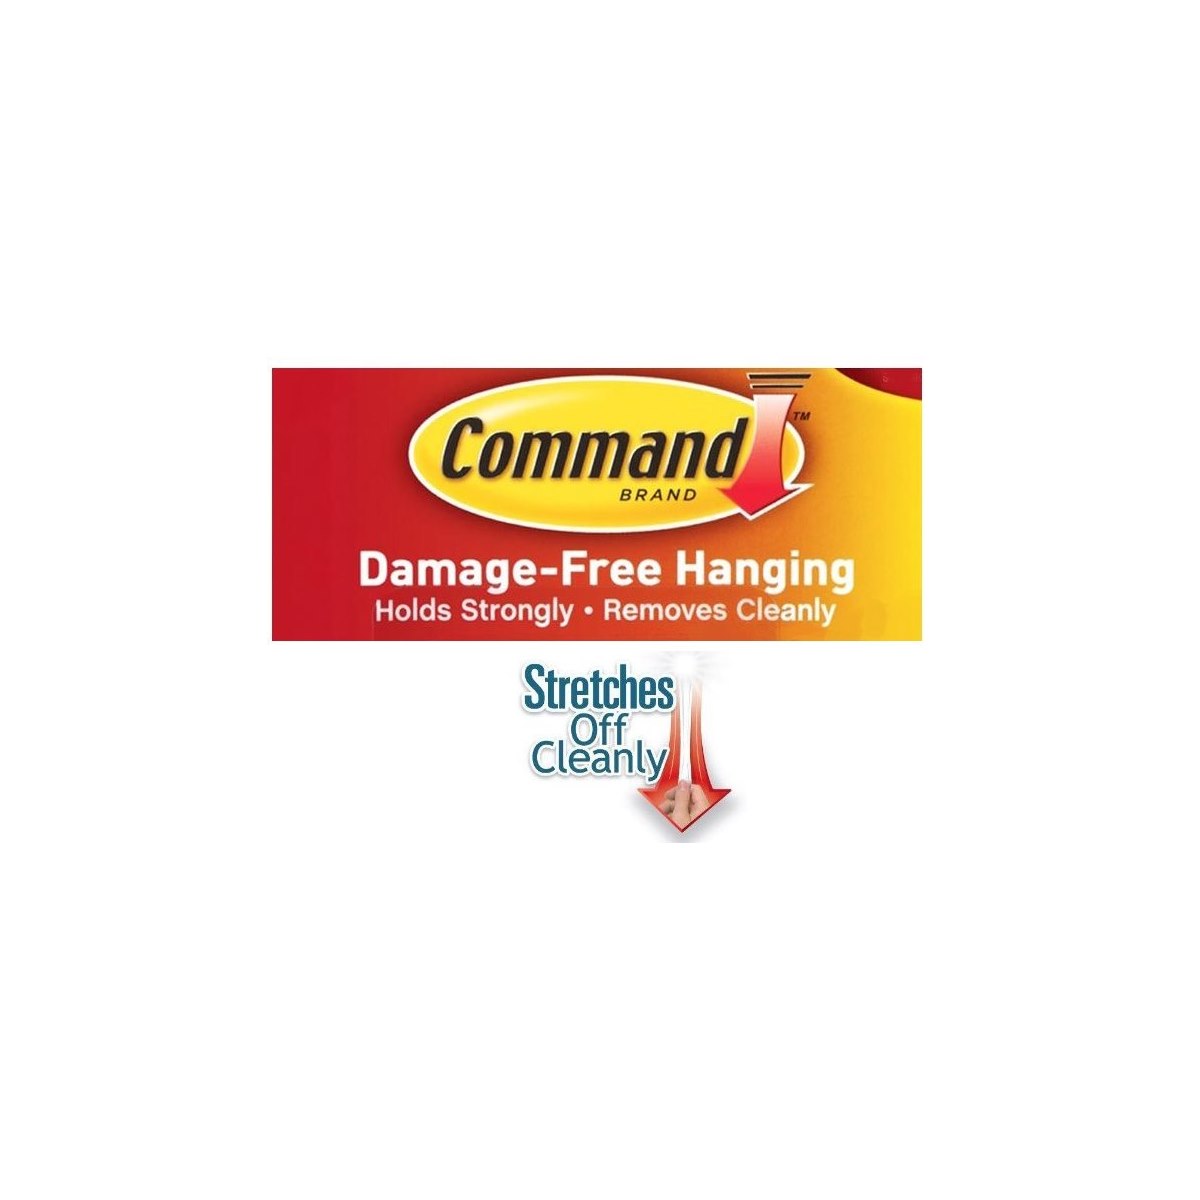 Where to Buy 3M Command Hooks online